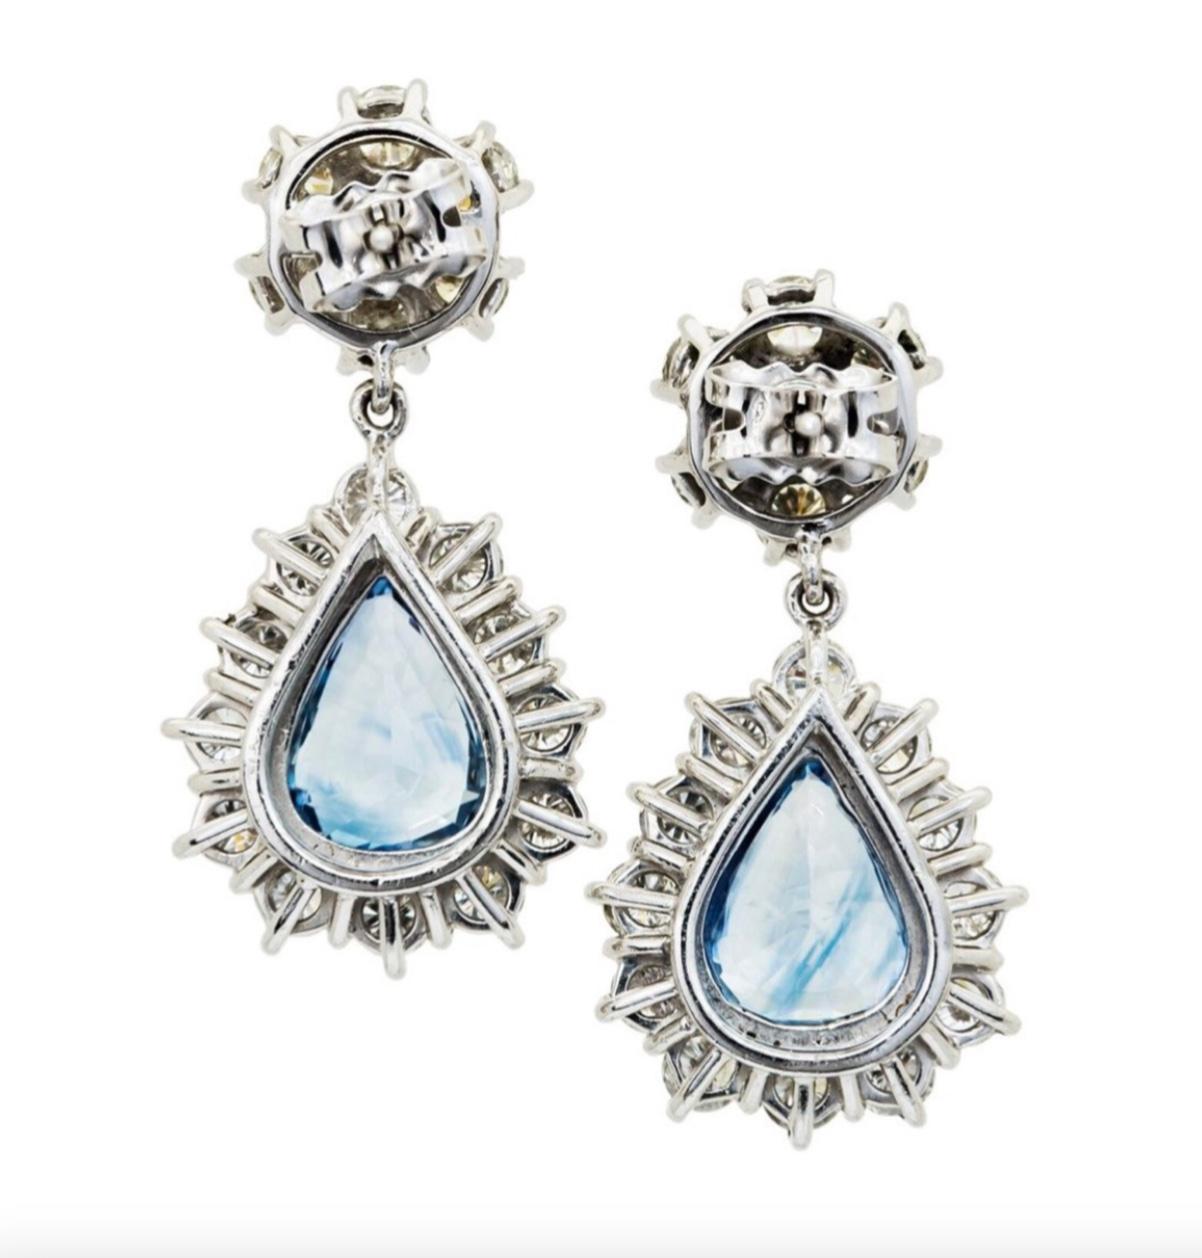 A pair of stunning articulated sapphire and diamond cluster drop earrings mounted in 18 carat white gold.

Two pear shaped sapphires of approx 7.20 carats in total surrounded by thirty-eight brilliant-cut diamonds of approx 5 carats in total.